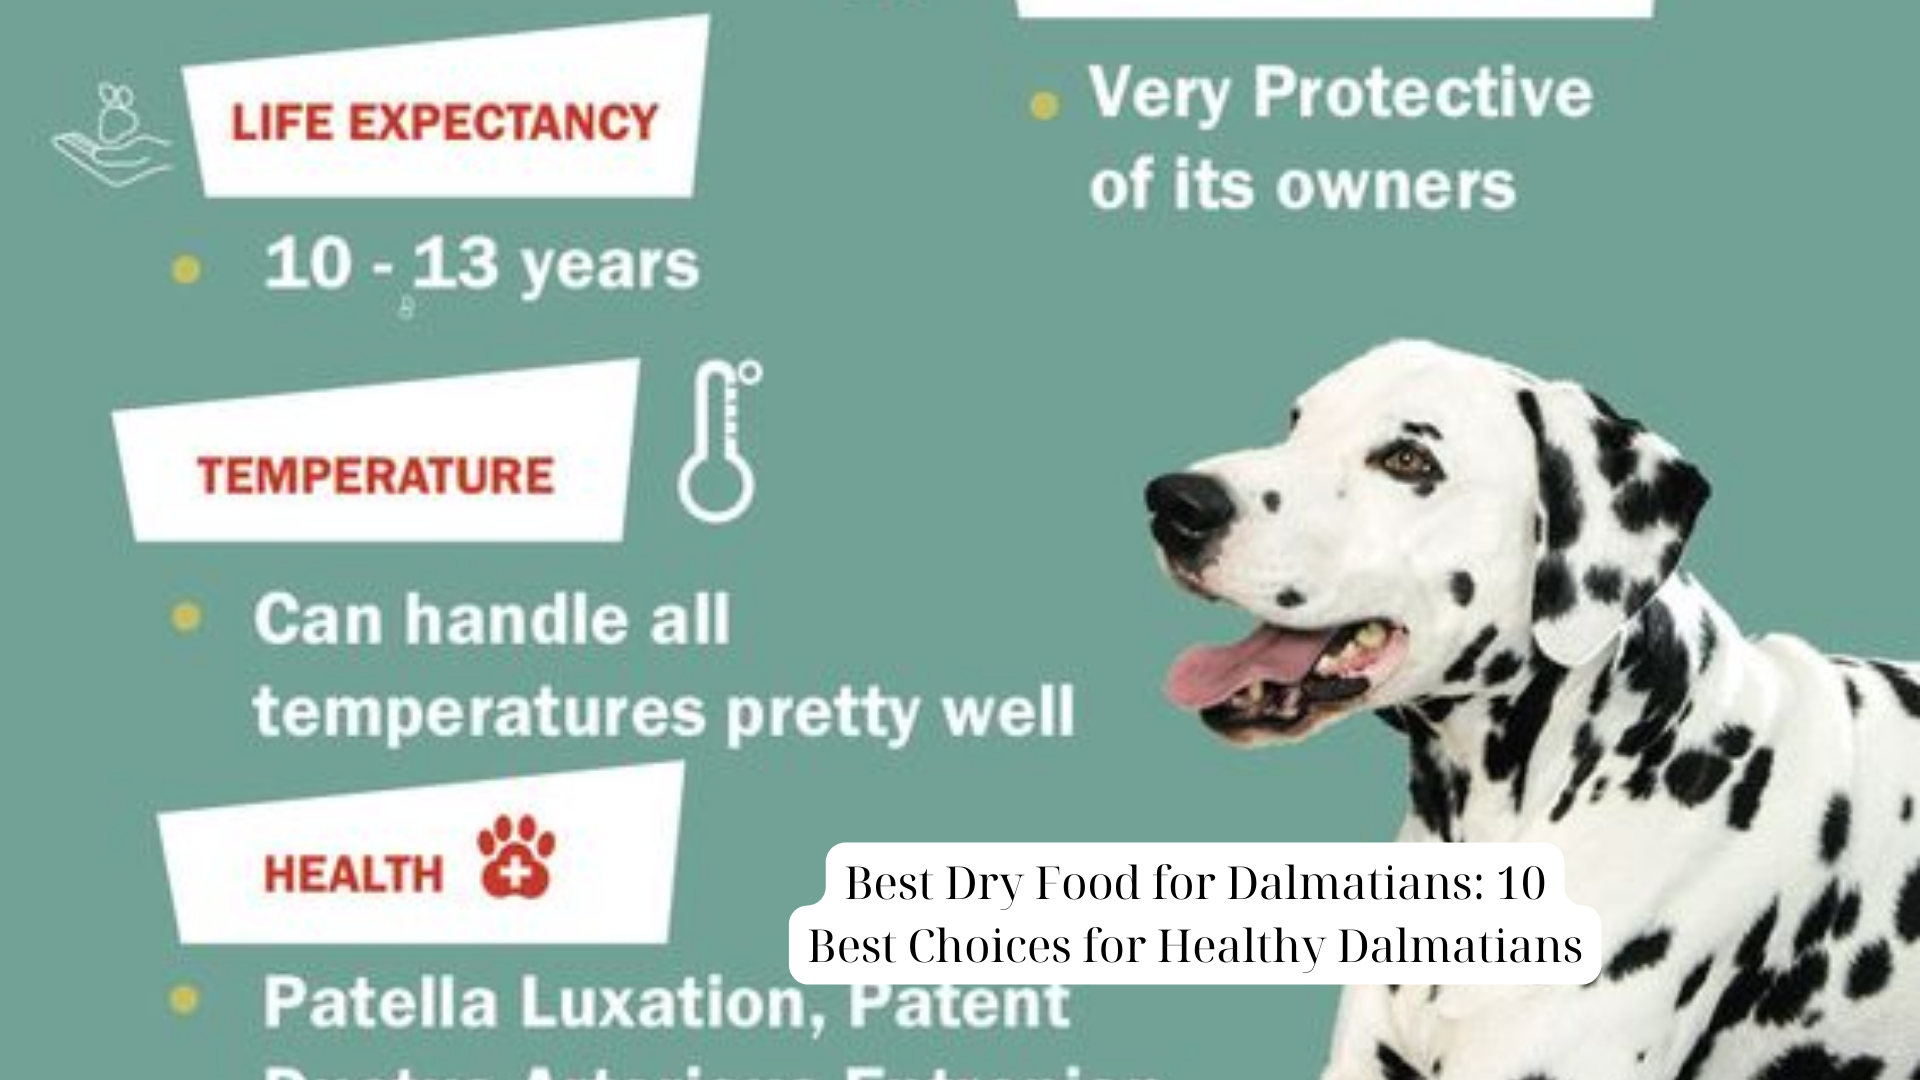 Best Dry Food for Dalmatians 10 Best Choices for Healthy Dalmatians (1)